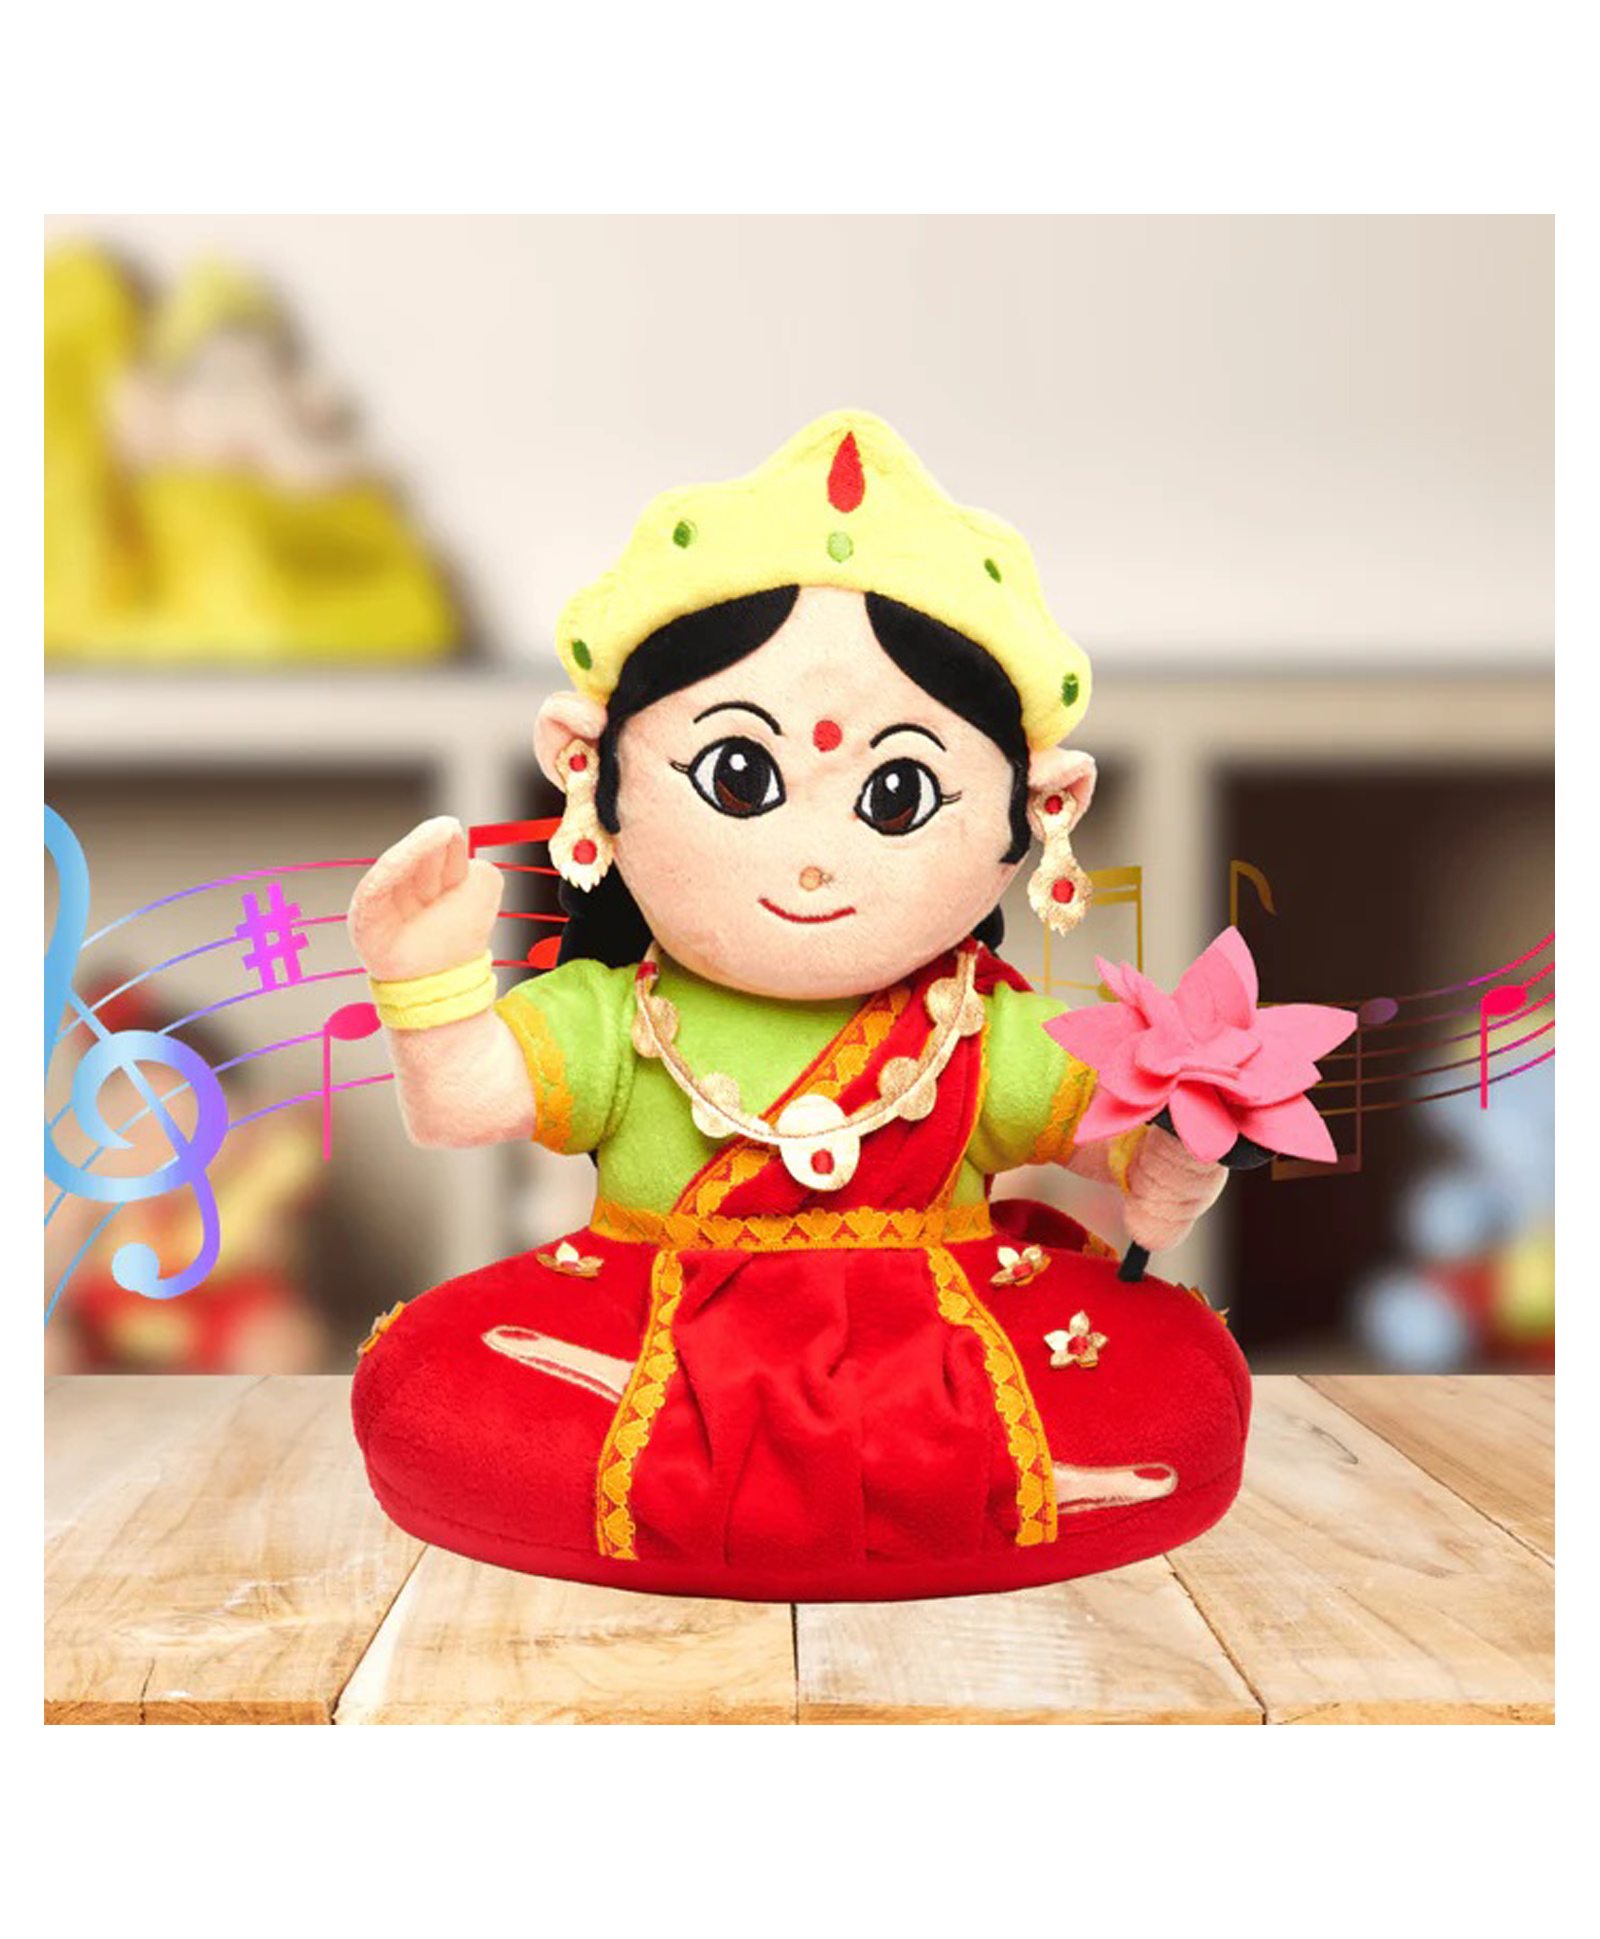 Panda's Box Mantra Singing Devi Lakshmi Plush Toy - Red Online India, Buy  Dolls and Dollhouses for (3-6 Years) at  - 12297102